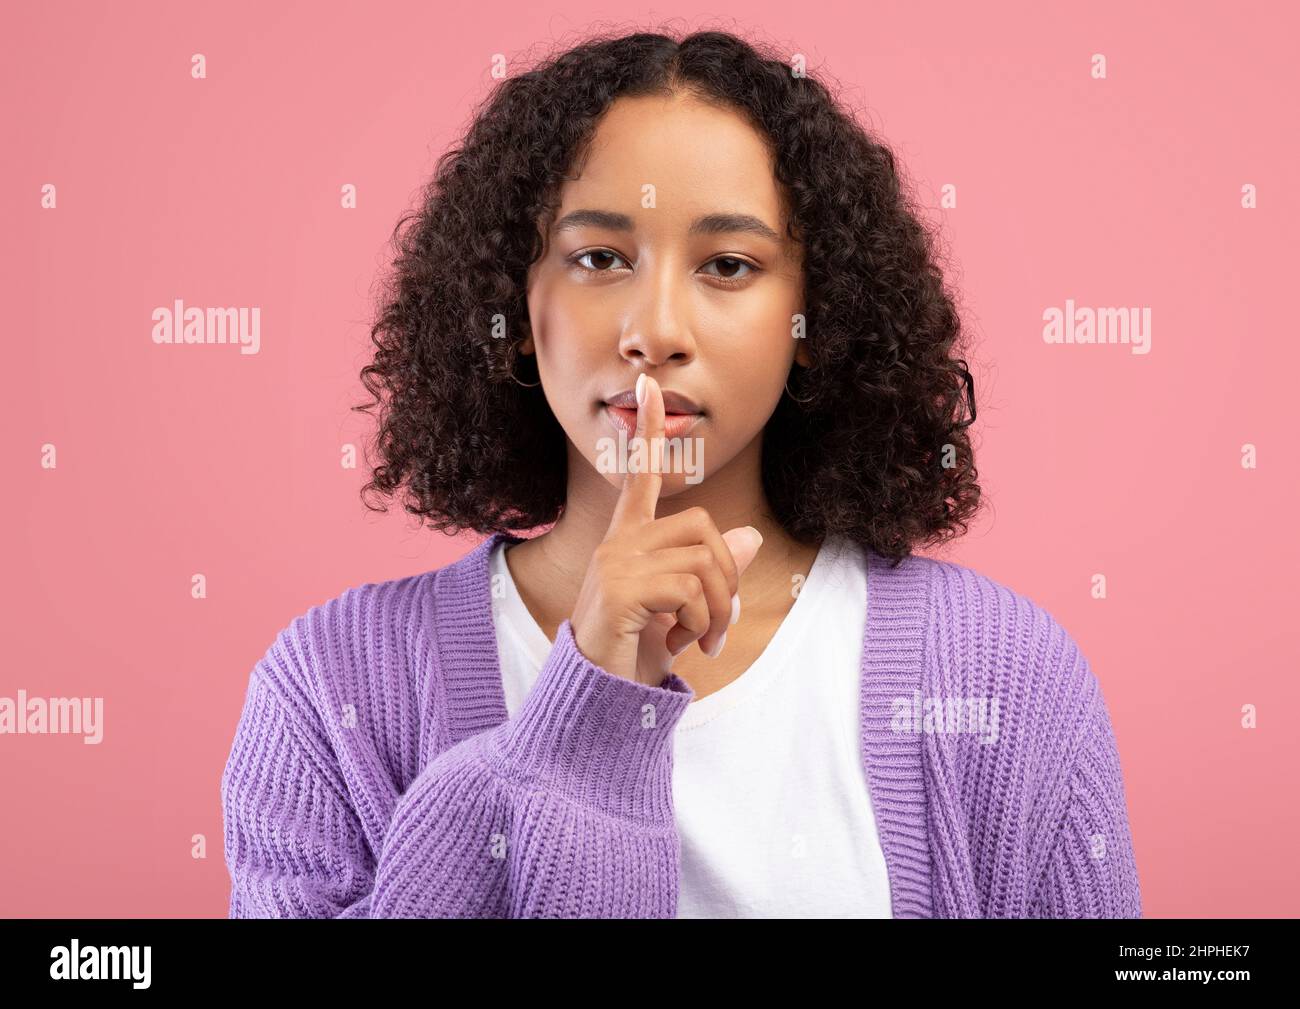 Shh, keep silence, confidential information. Young African American woman gesturing hush on pink studio background Stock Photo